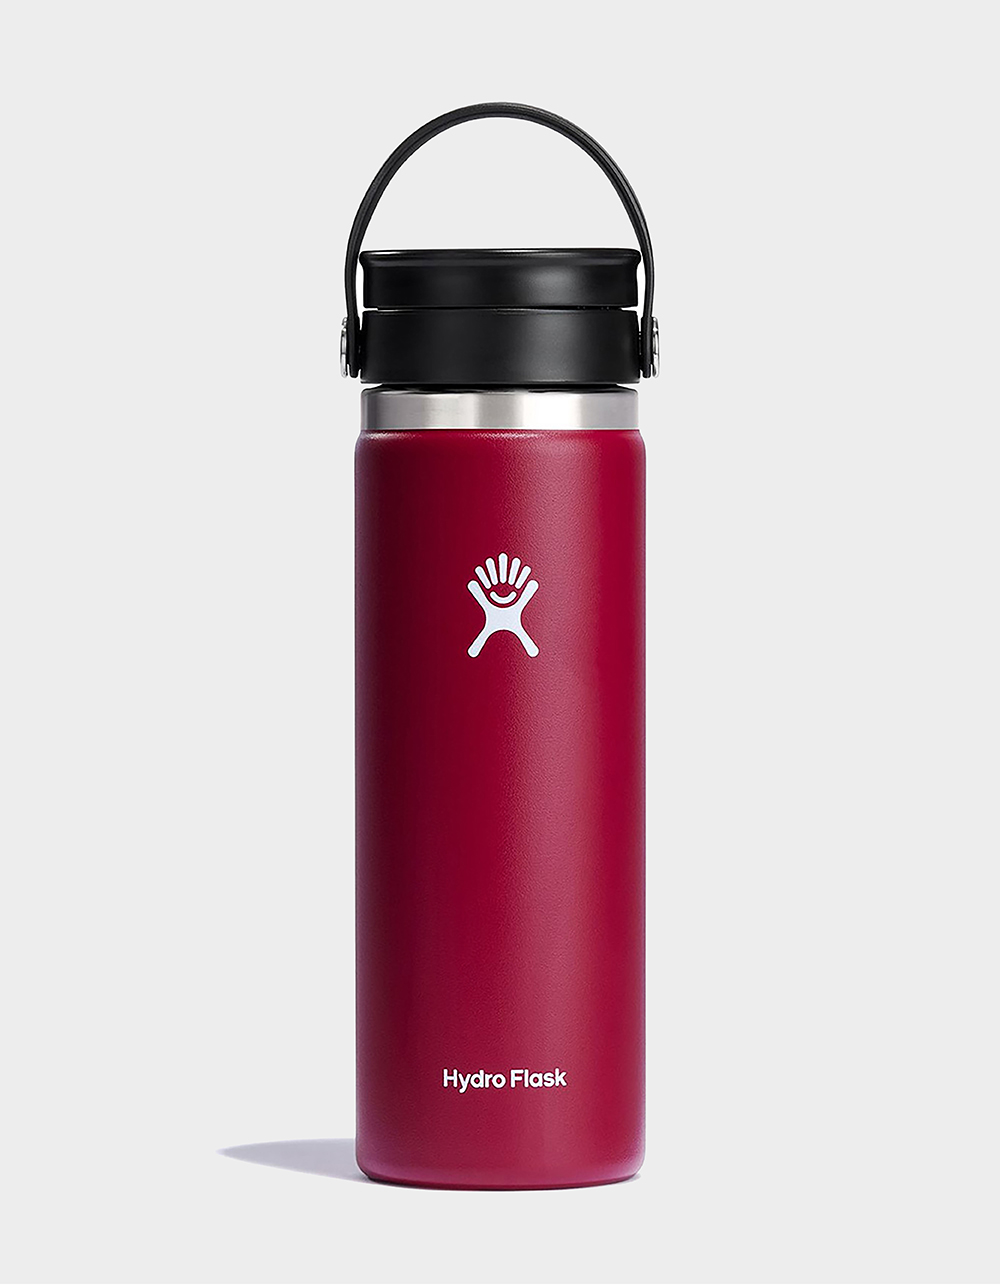  Hydro Flask Large Insulated Lunch Box Berry : Home & Kitchen